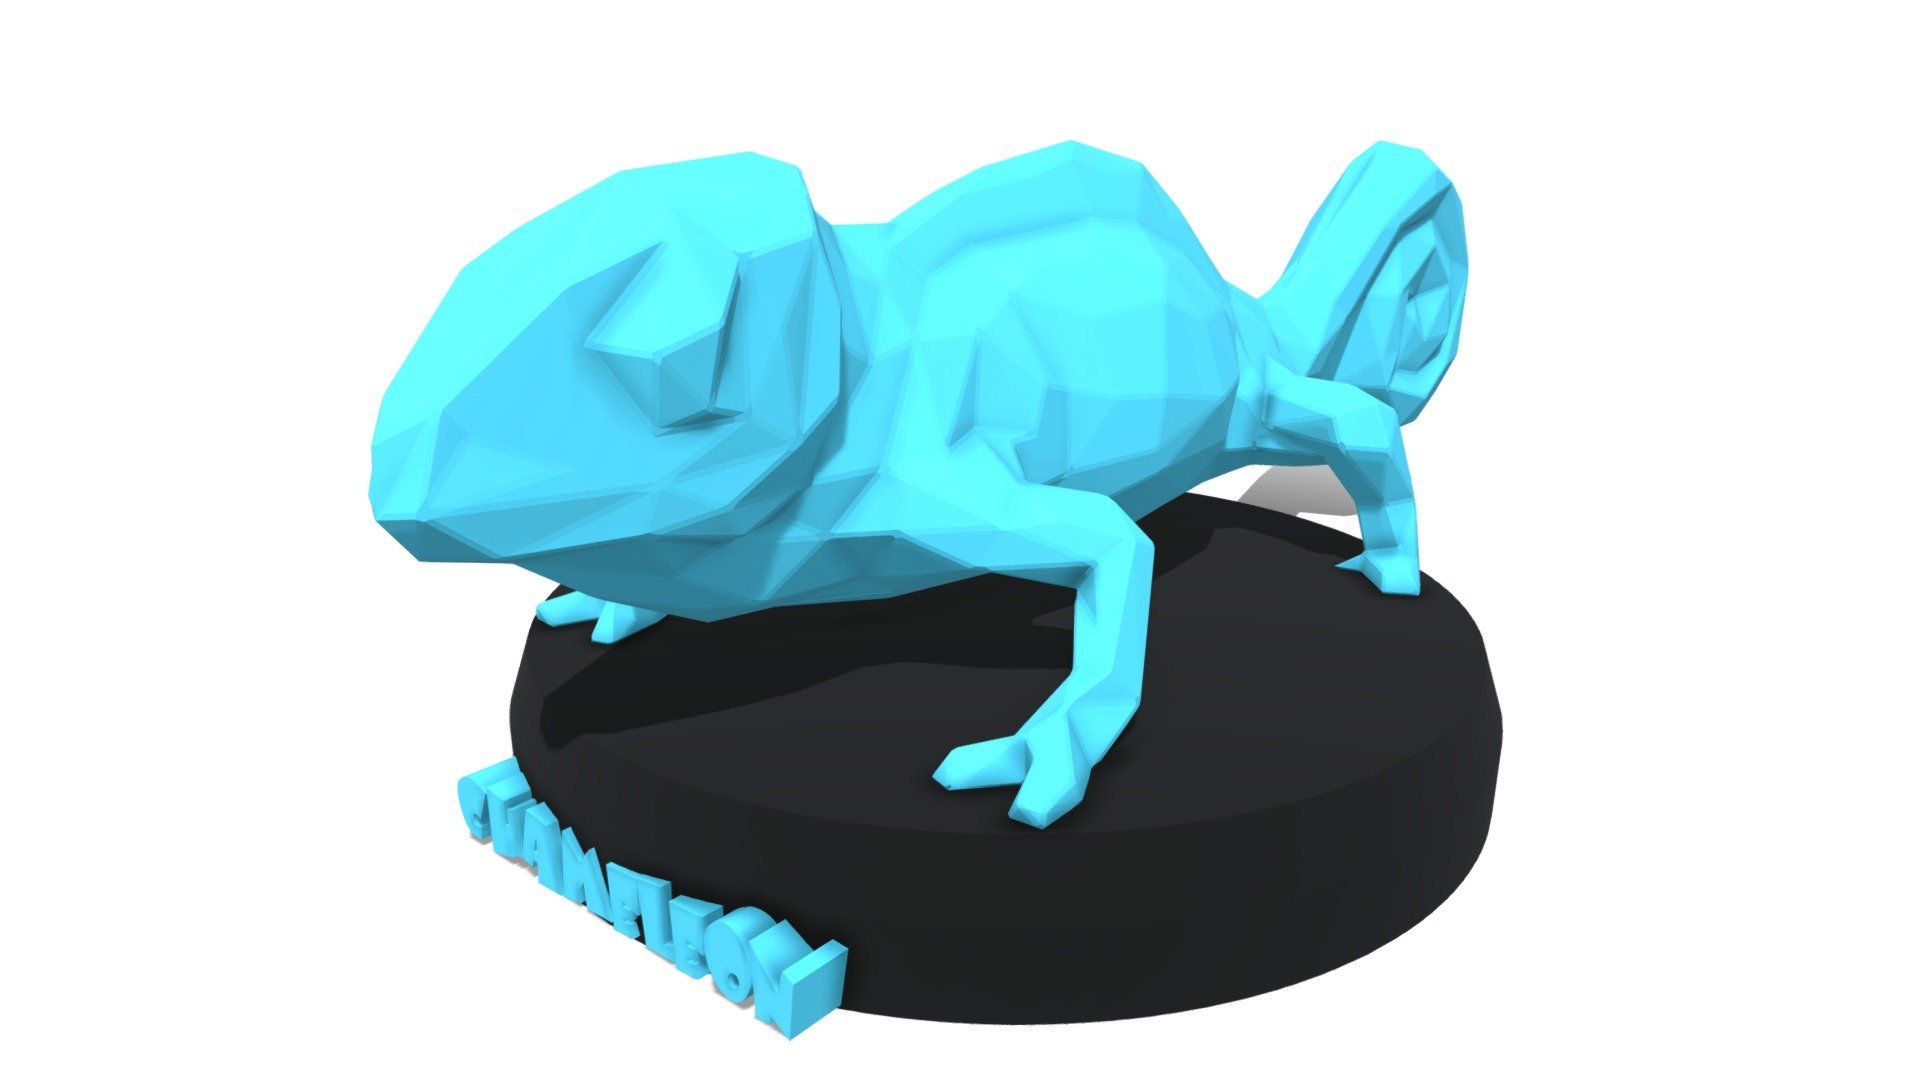 Polygonal 3D Model with Parametric modeling with gold material, make it recommend for :




Basic modeling 

Rigging 

sculpting 

Become Statue

Decorate

3D Print File

Toy

Have fun  :) - Poly Chameleon - Buy Royalty Free 3D model by Puppy3D 3d model